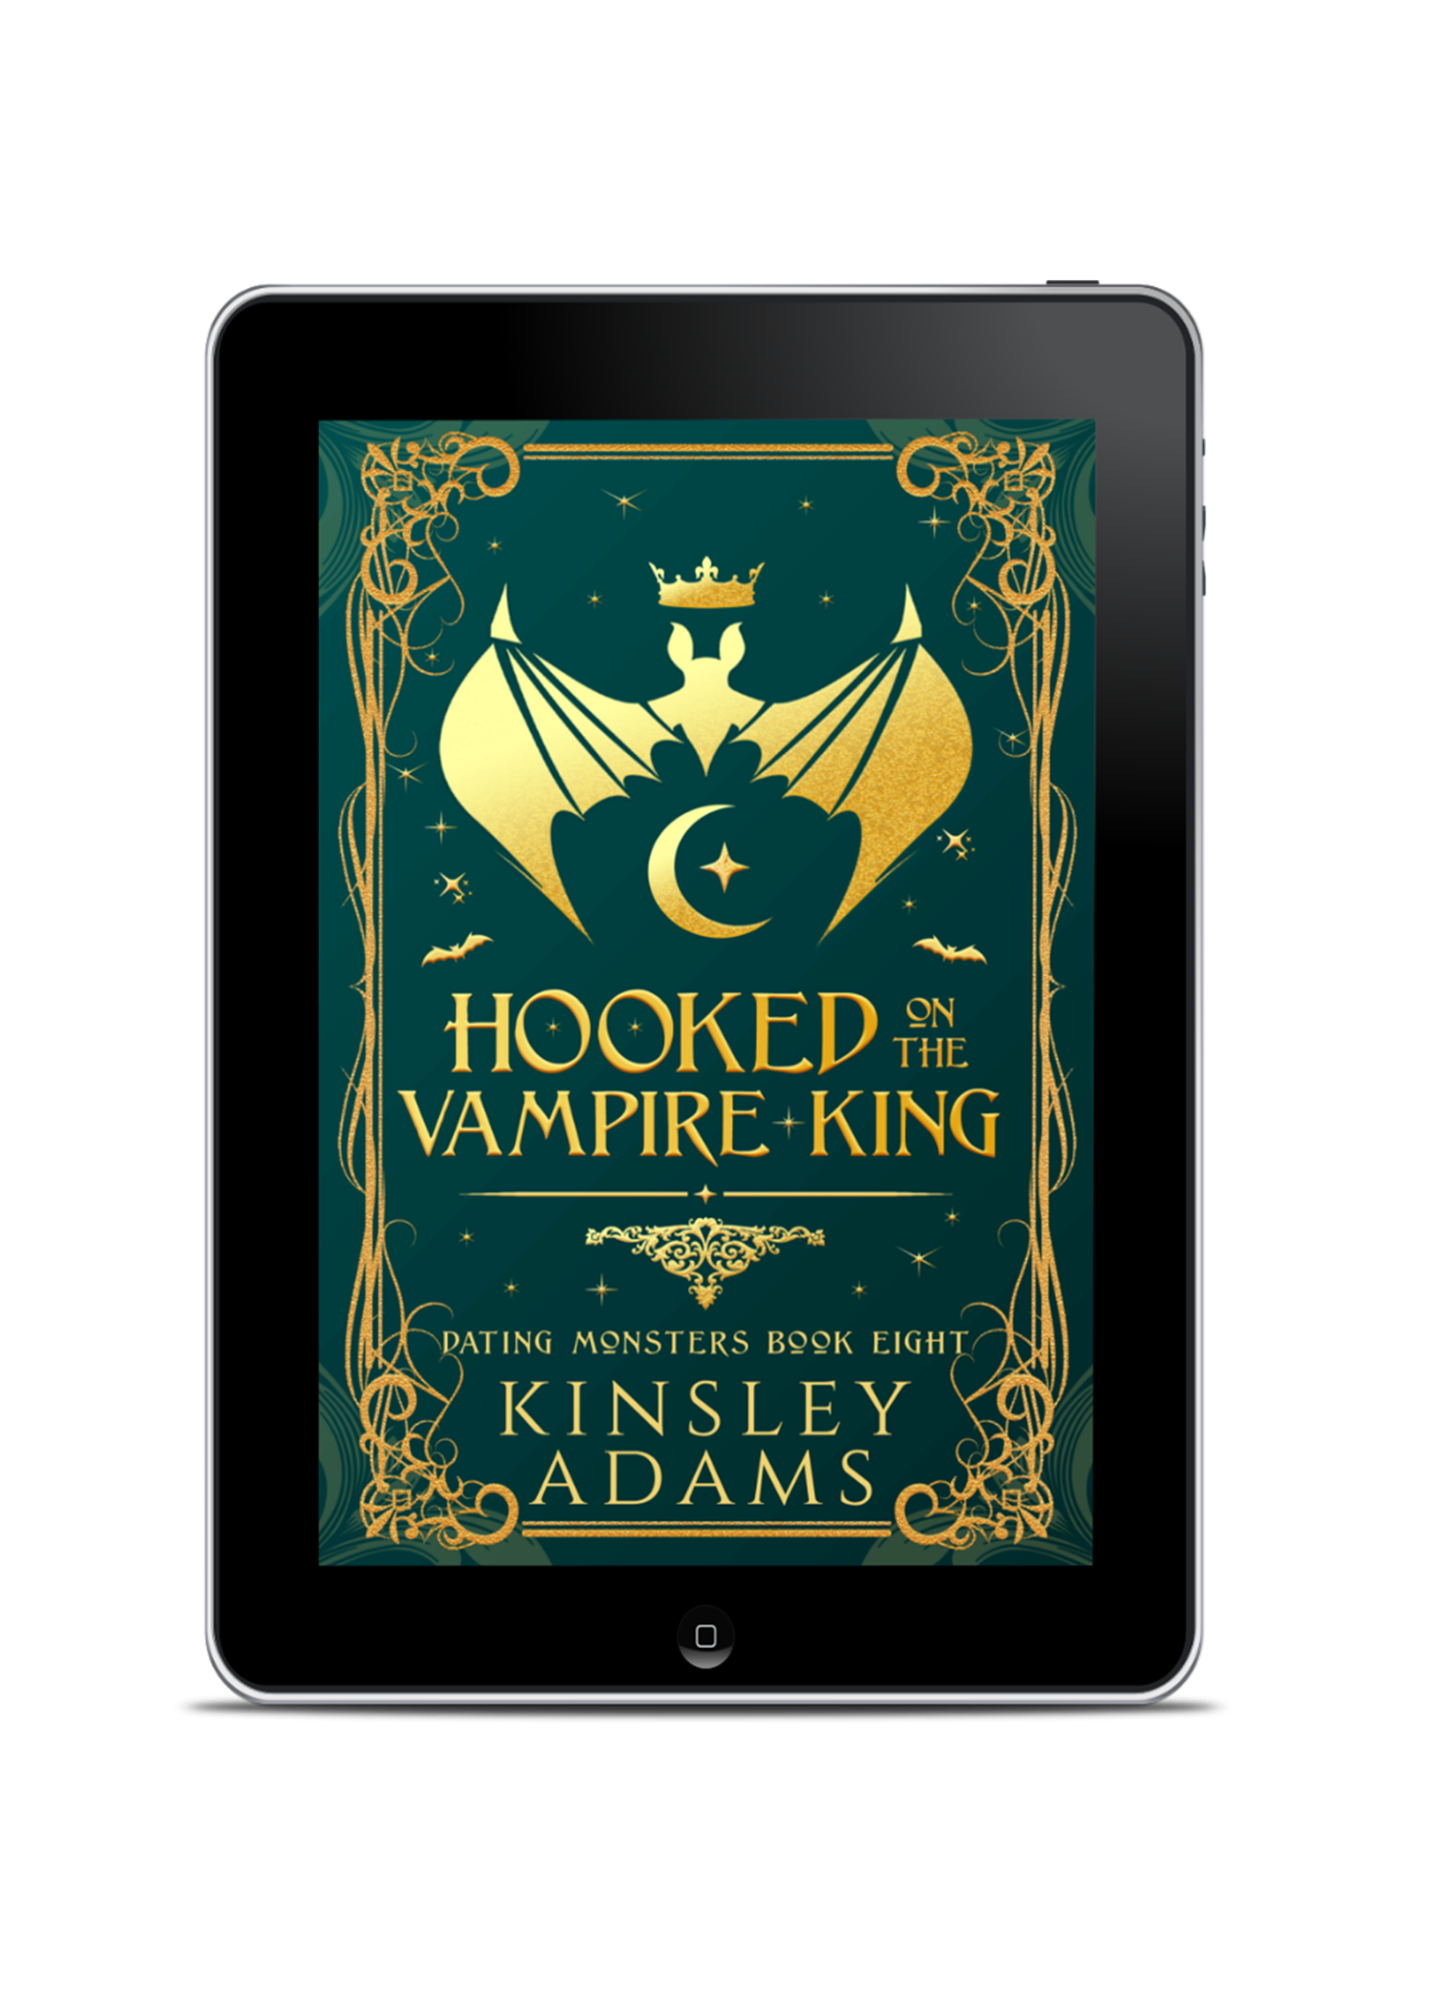 Hooked on the Vampire King: A Fated Mates Vampire and Vampire Slayer Romance (Dating Monsters Book 8)